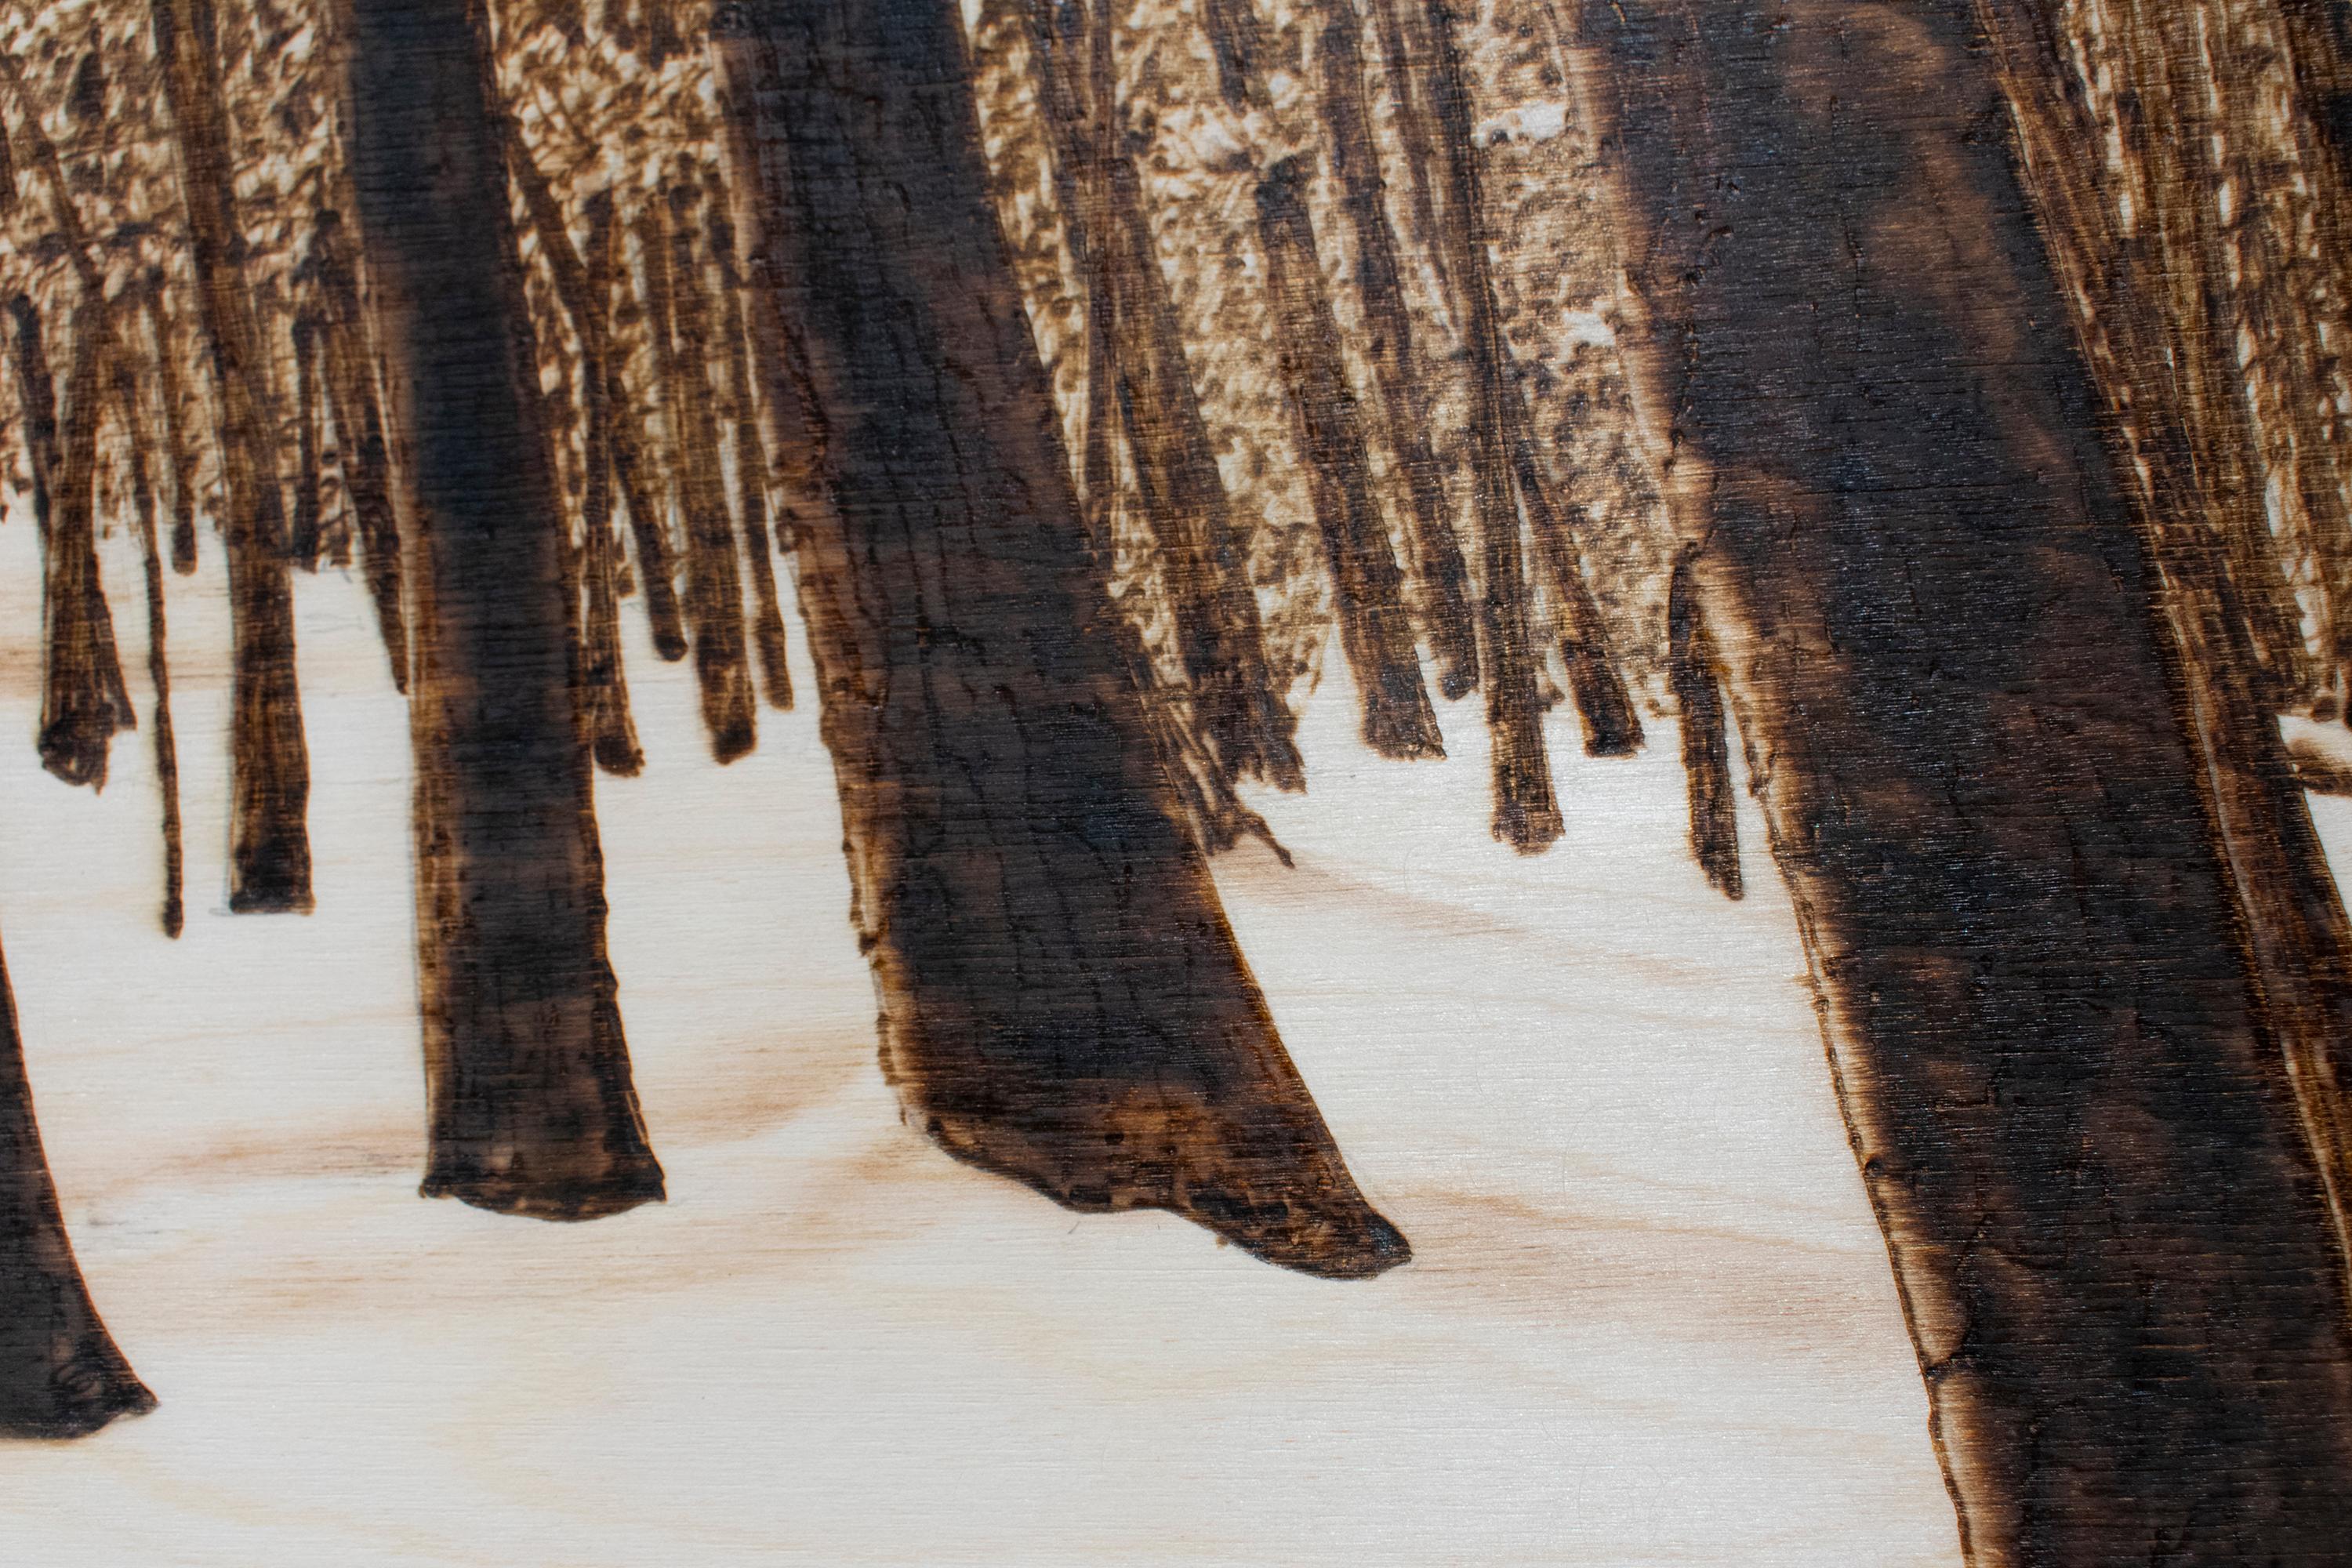 Hemlocks (Snowy Forest Landscape on Birch Wood Made with a Blowtorch) - Contemporary Painting by Paul Chojnowski